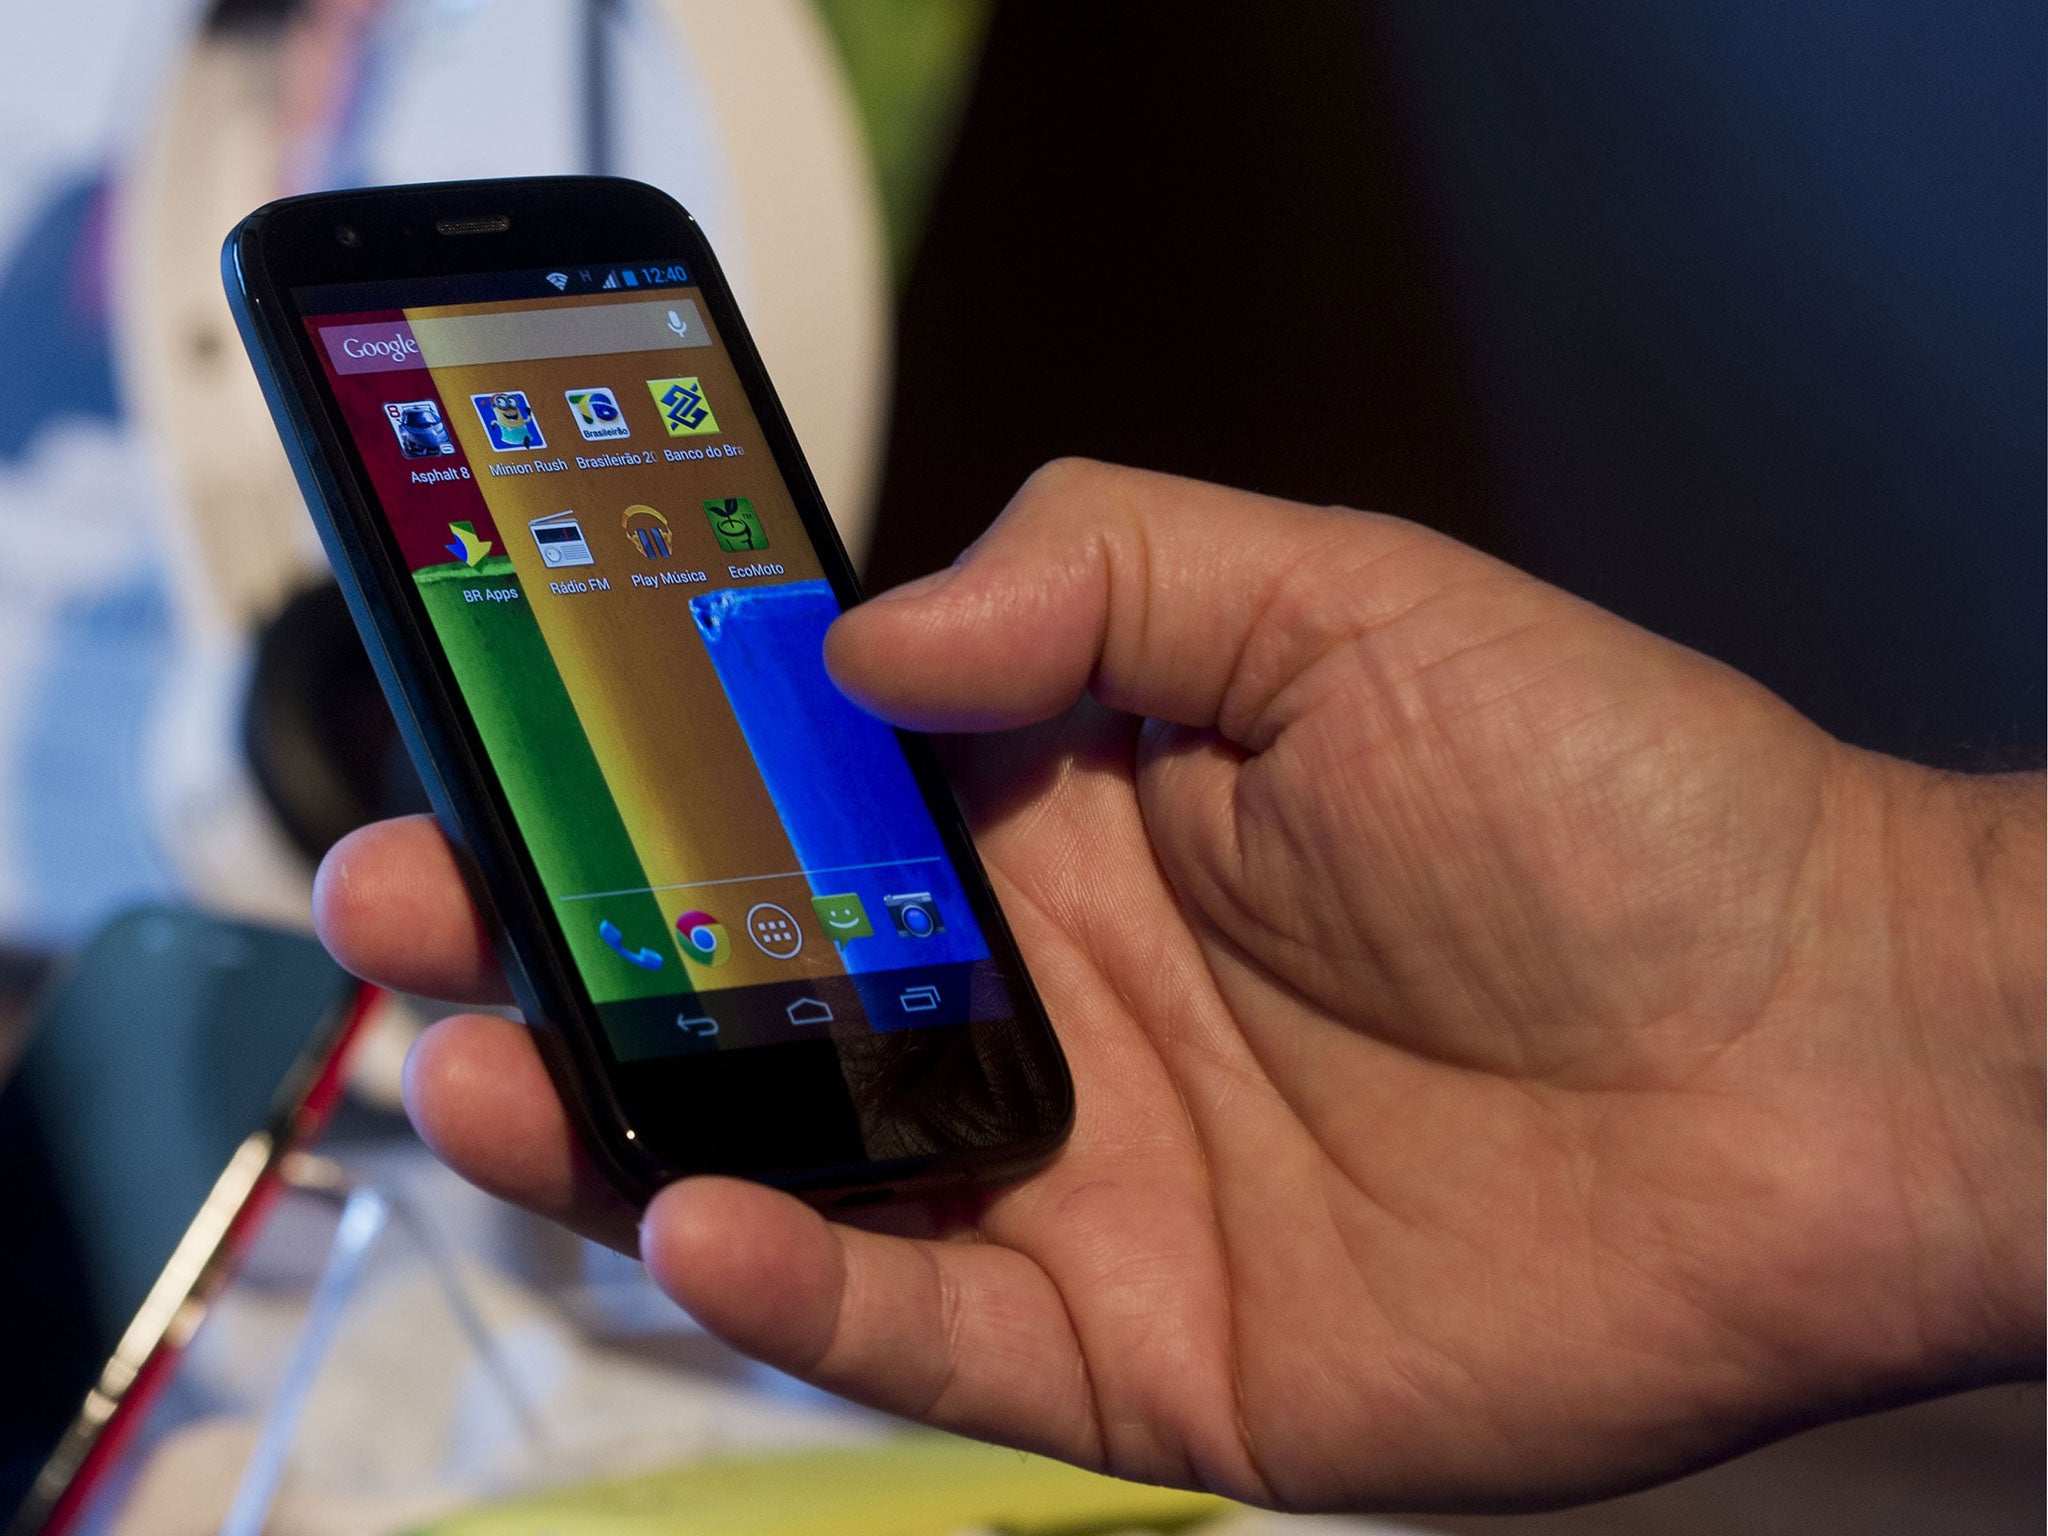 The new low cost smartphone of Motorola, 'Motorola Moto G', is displayed in Sao Paulo, Brazil on November 13, 2013. The smartphone, with dimensions 65.9mm W x 129.9mm H x 6.0 - 11.6mm D is equipped with a Qualcomm Snapdragon 400 with quad-core 1,2 GHz CPU